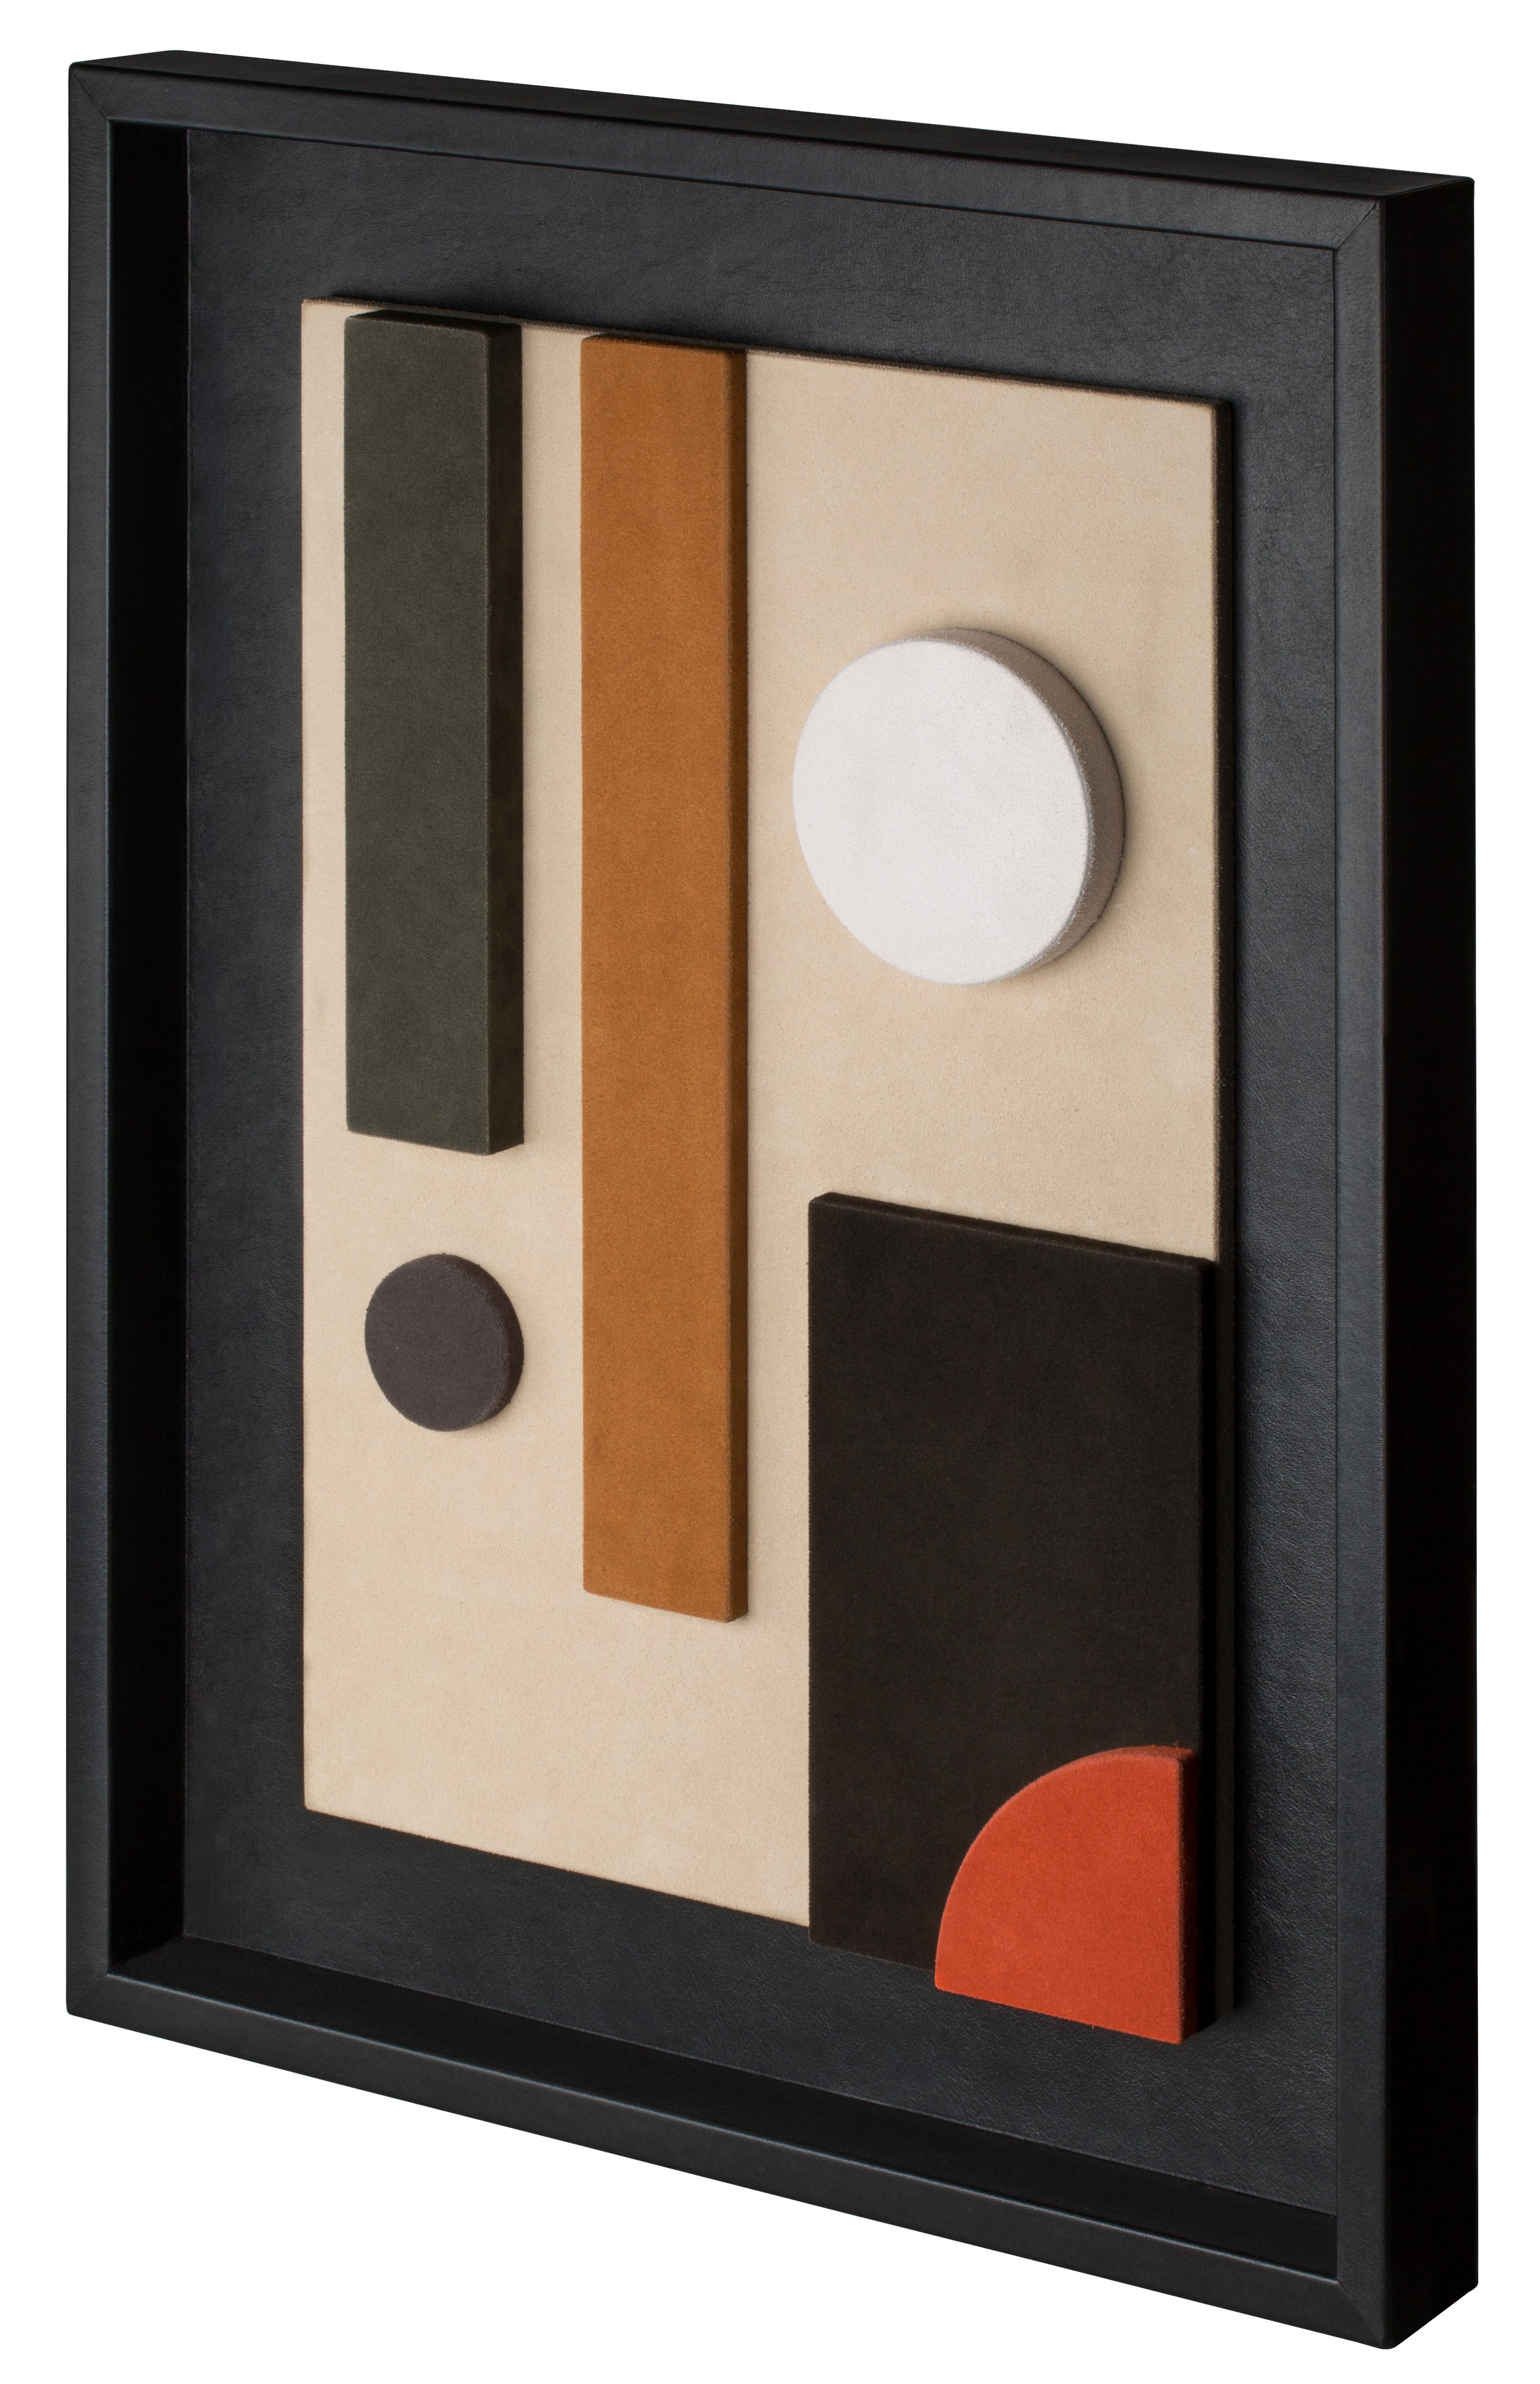 This suede-covered wall sculpture is framed in black nappa.
The interaction between colors and shapes makes it a decorative piece based on pure geometry, where abstraction and figuration create formal structures that allow color to dominate. This